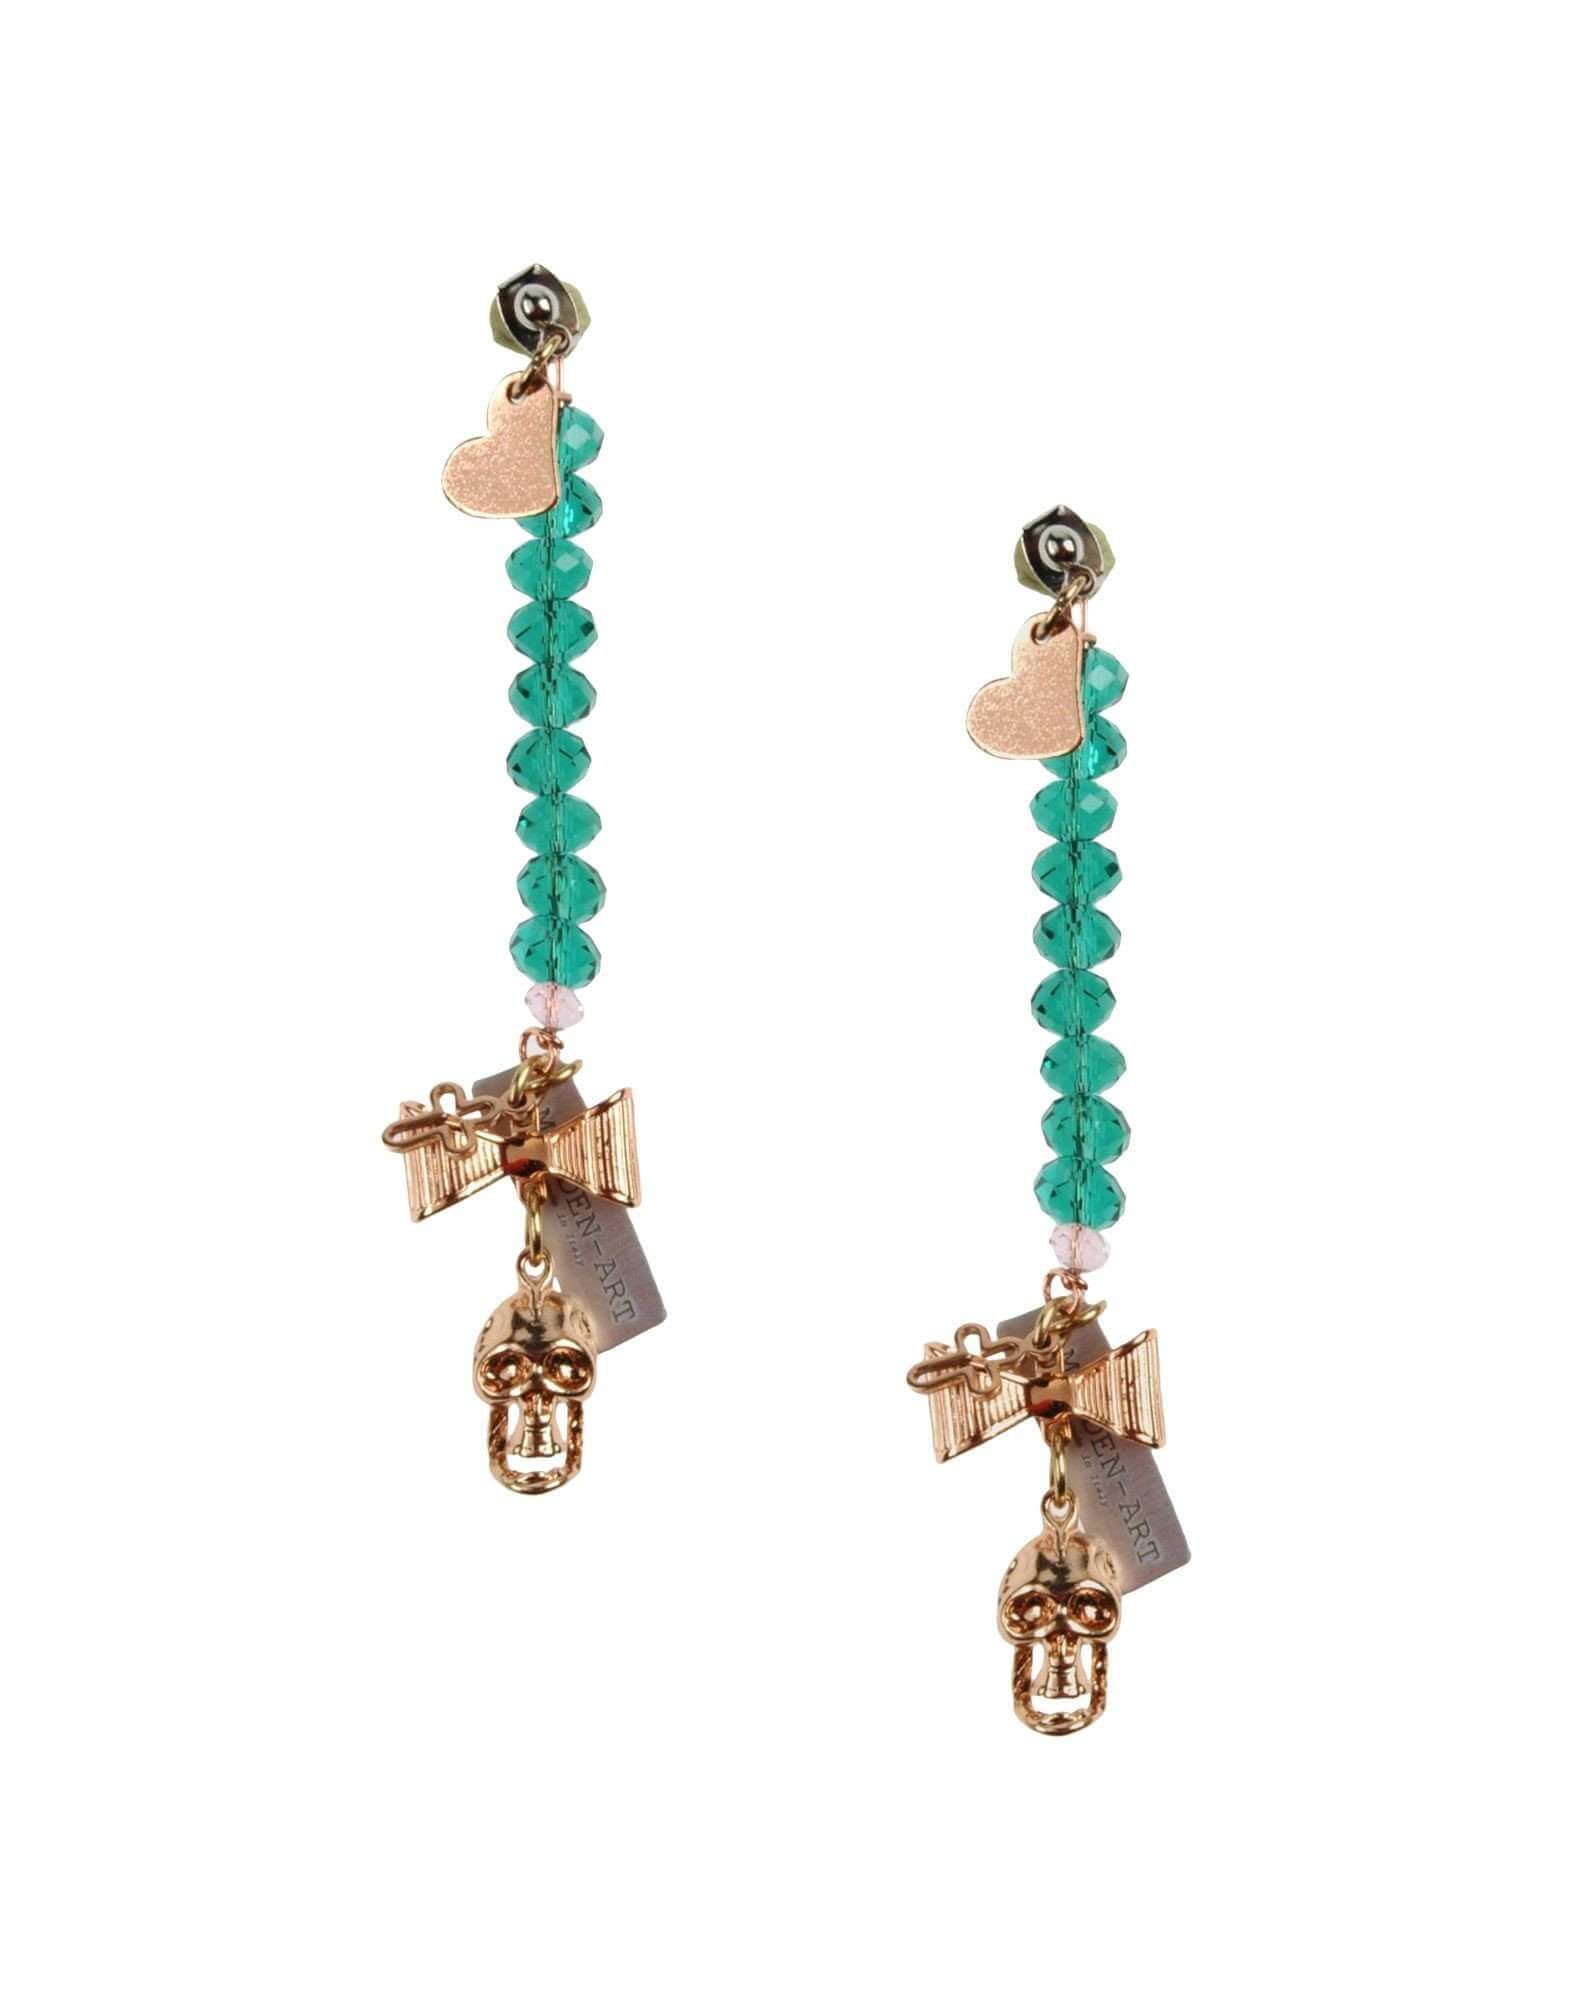 Emerald Green Crystals and Rose Gold Skull, Heart Charms Earrings - Maiden-Art